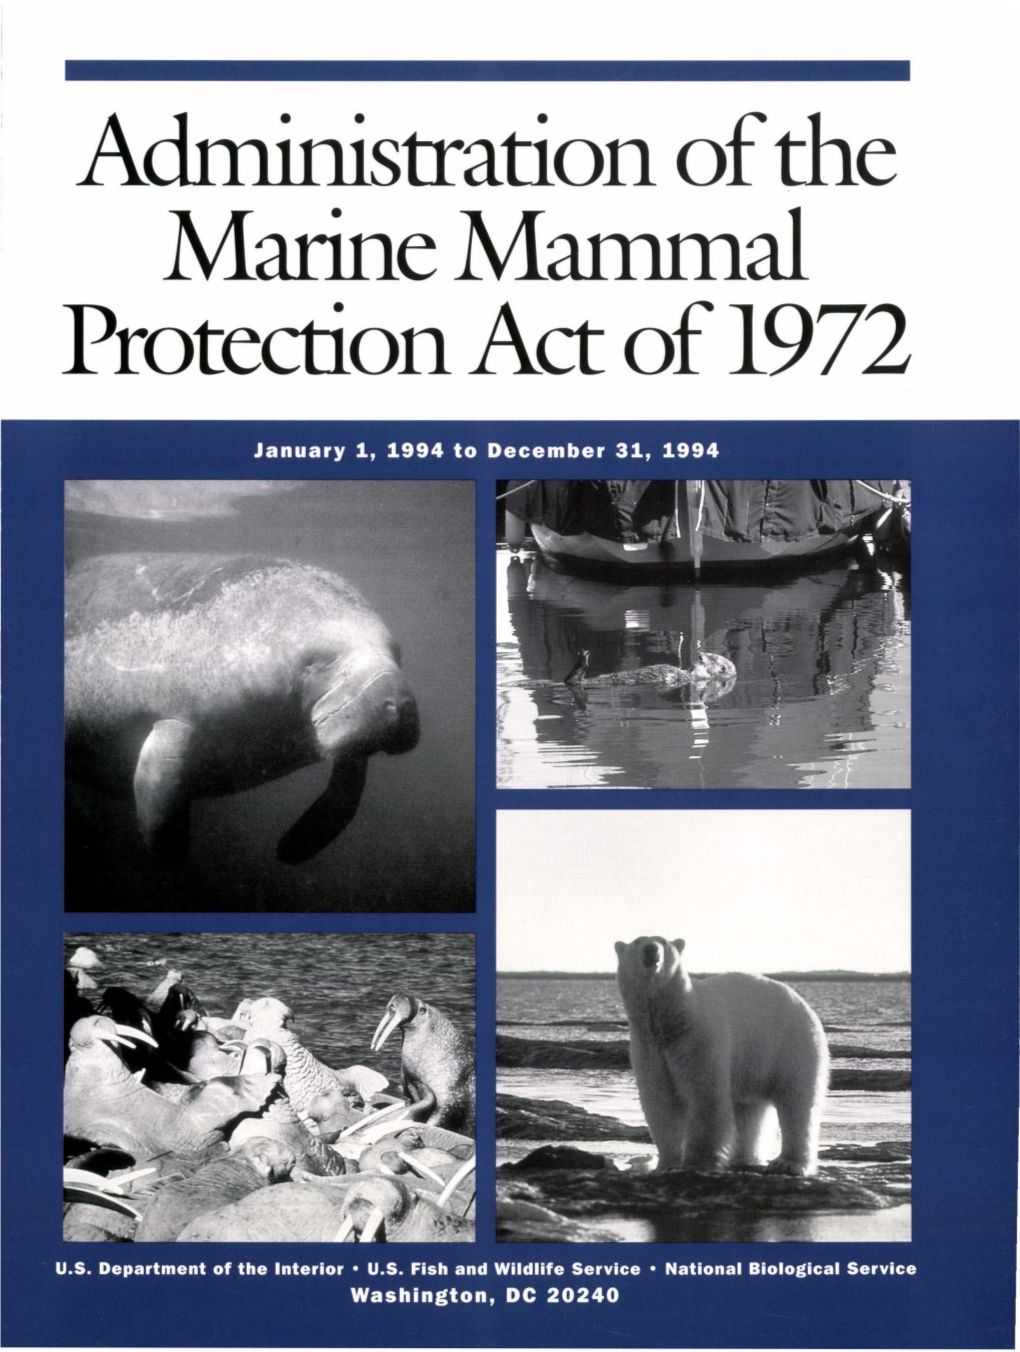 A · ·Strati on of the Marine Marmnal Protection Act of 1972